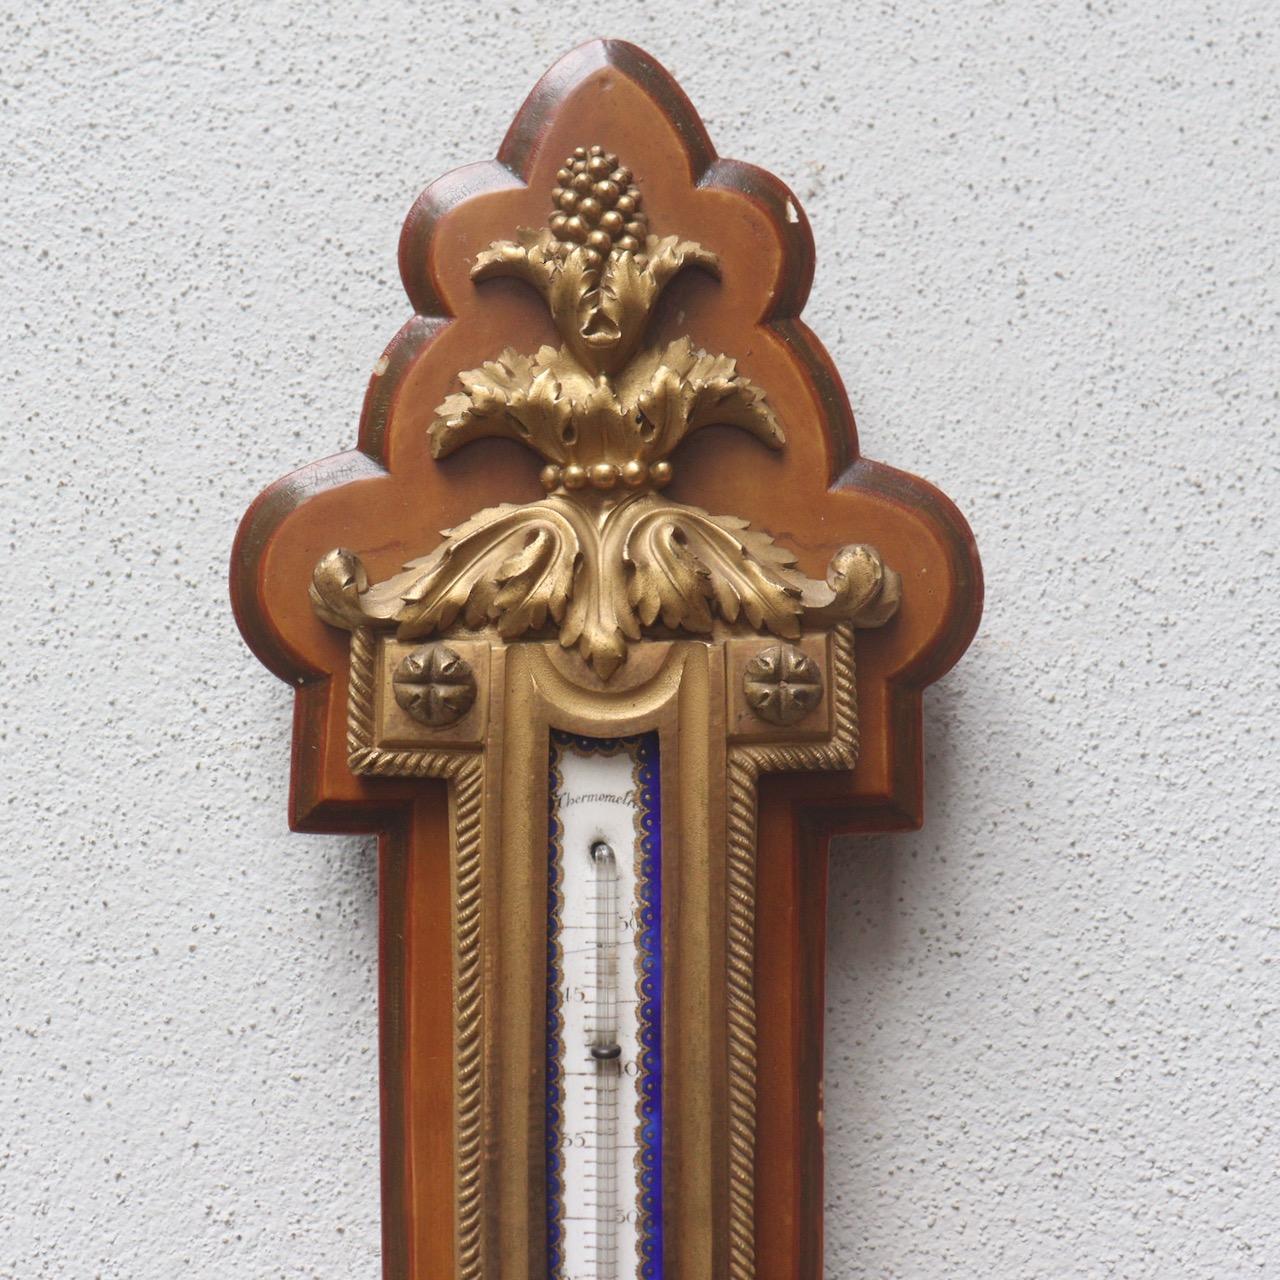 Enameled A French 19th Century Ormolu Barometer and Thermometer by Eugène Hazart Paris